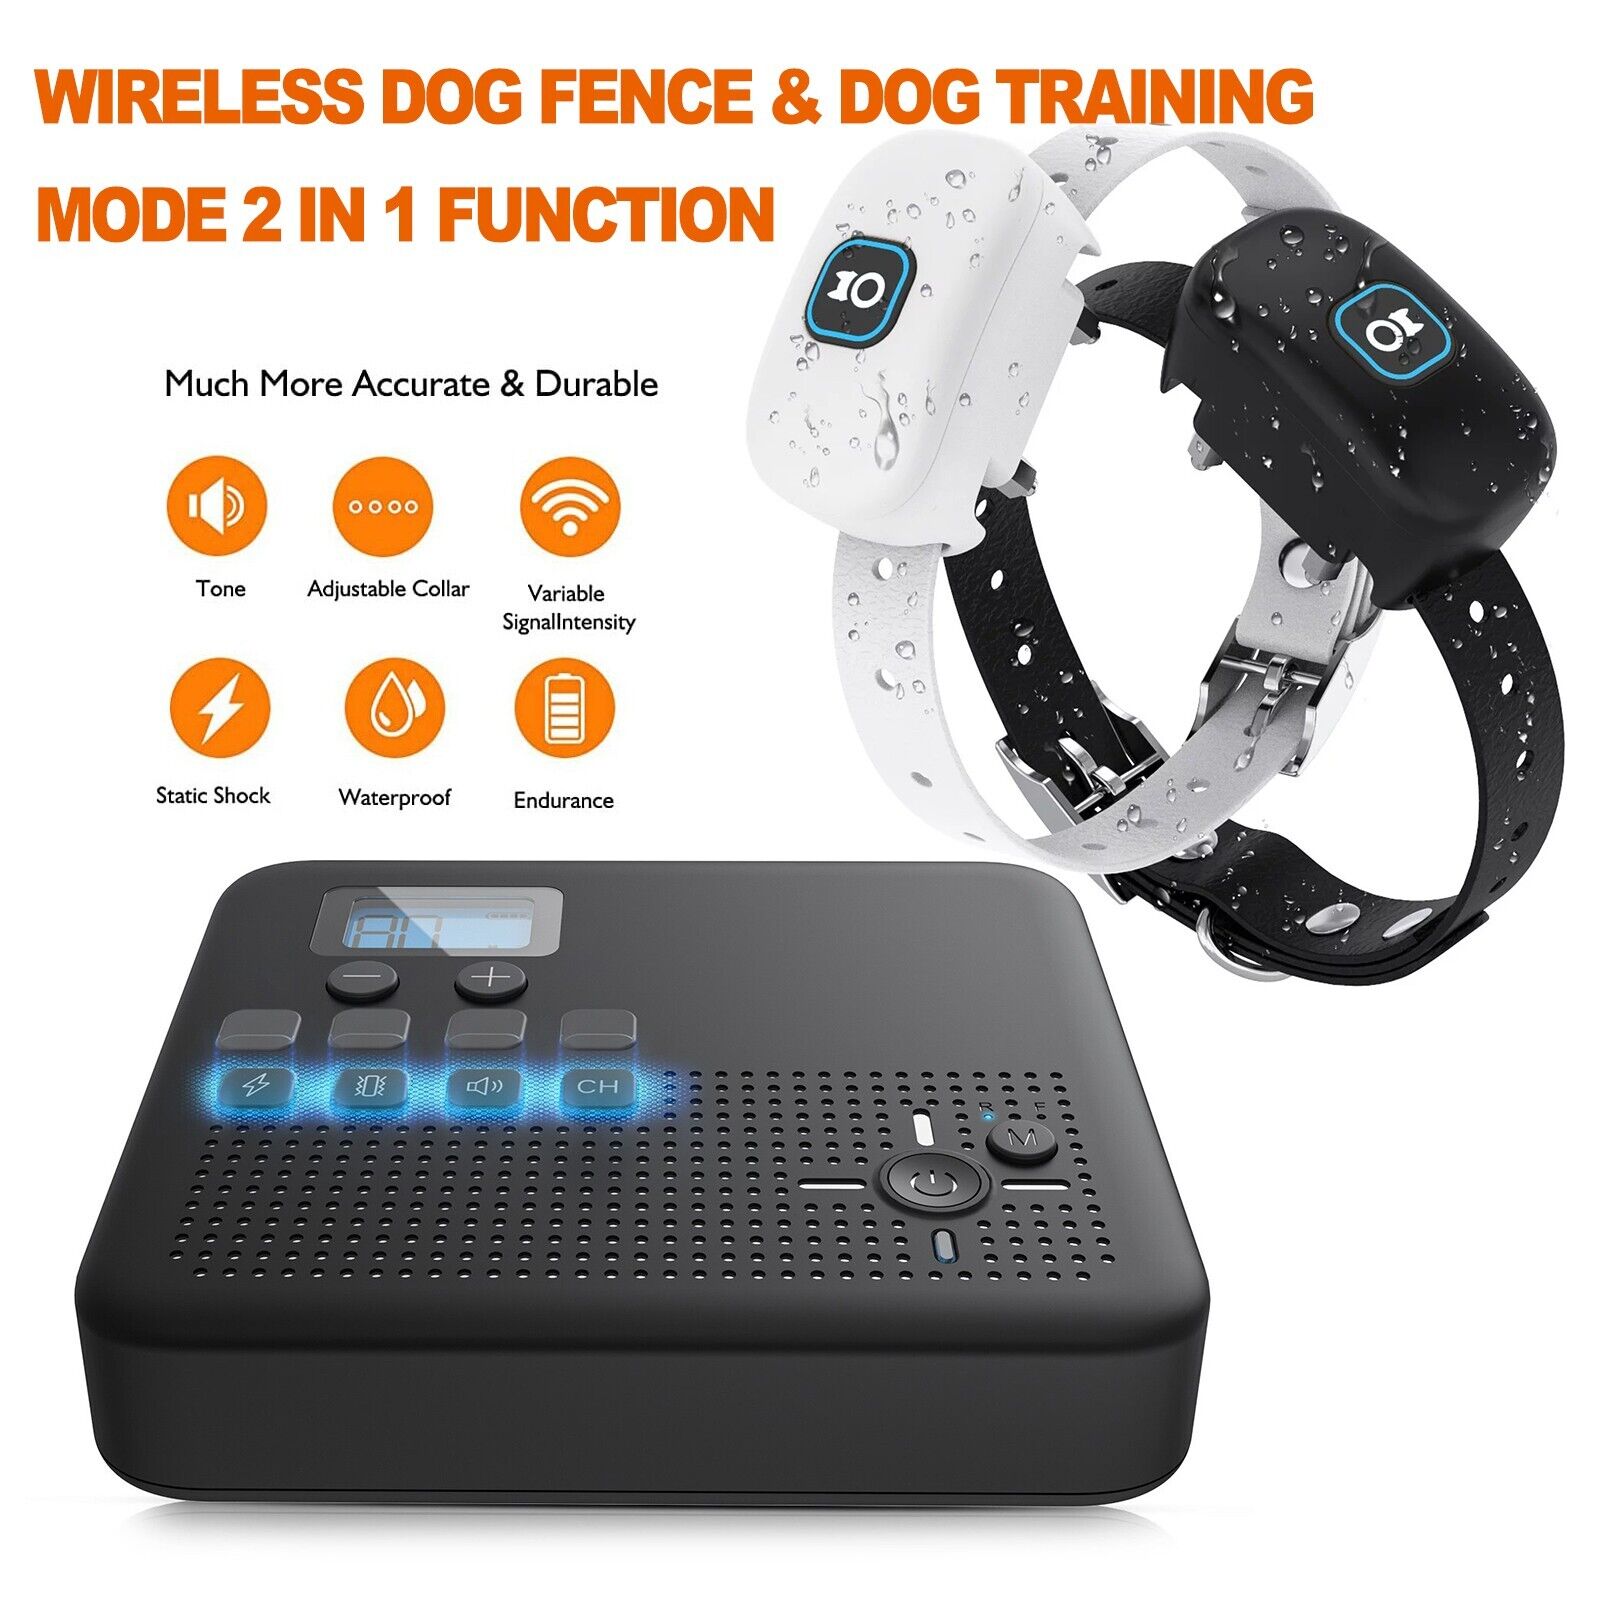 Pet Dog Wireless Electric Fence Containment System Dog Training Collars Shock